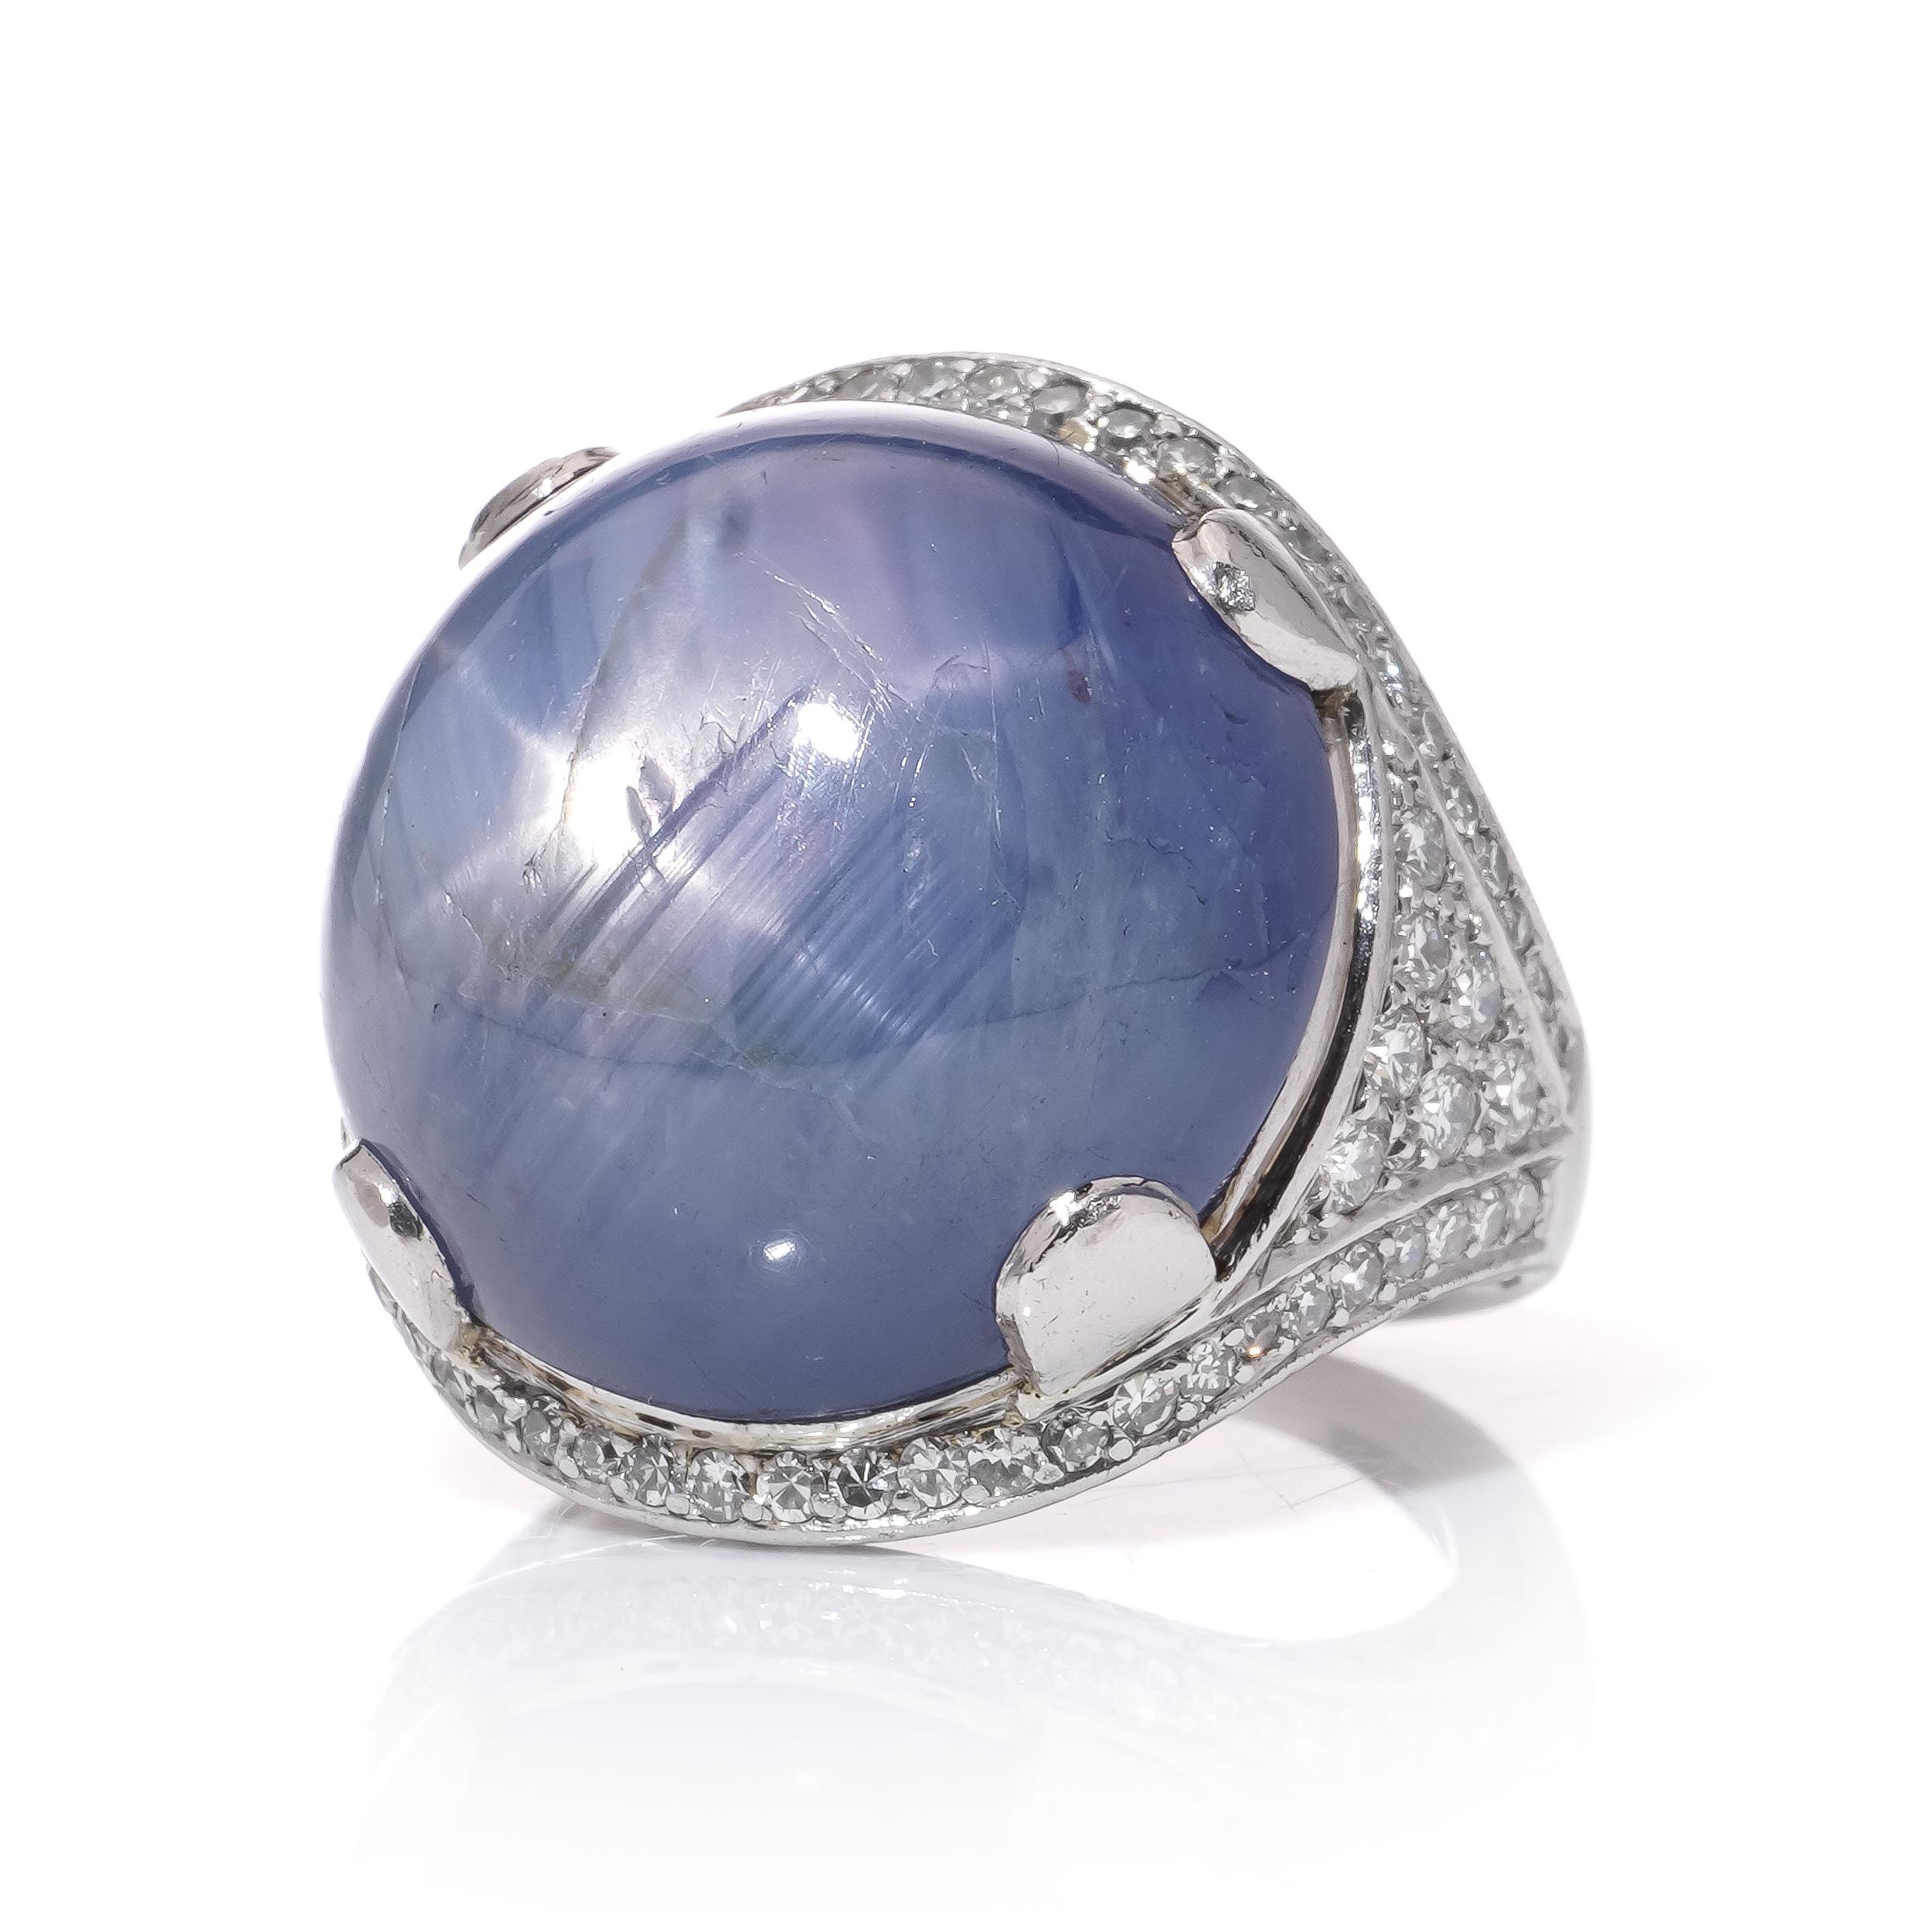 Platinum ladies' dome ring with 46 cts. of round natural cabochon sapphire In Good Condition For Sale In Braintree, GB